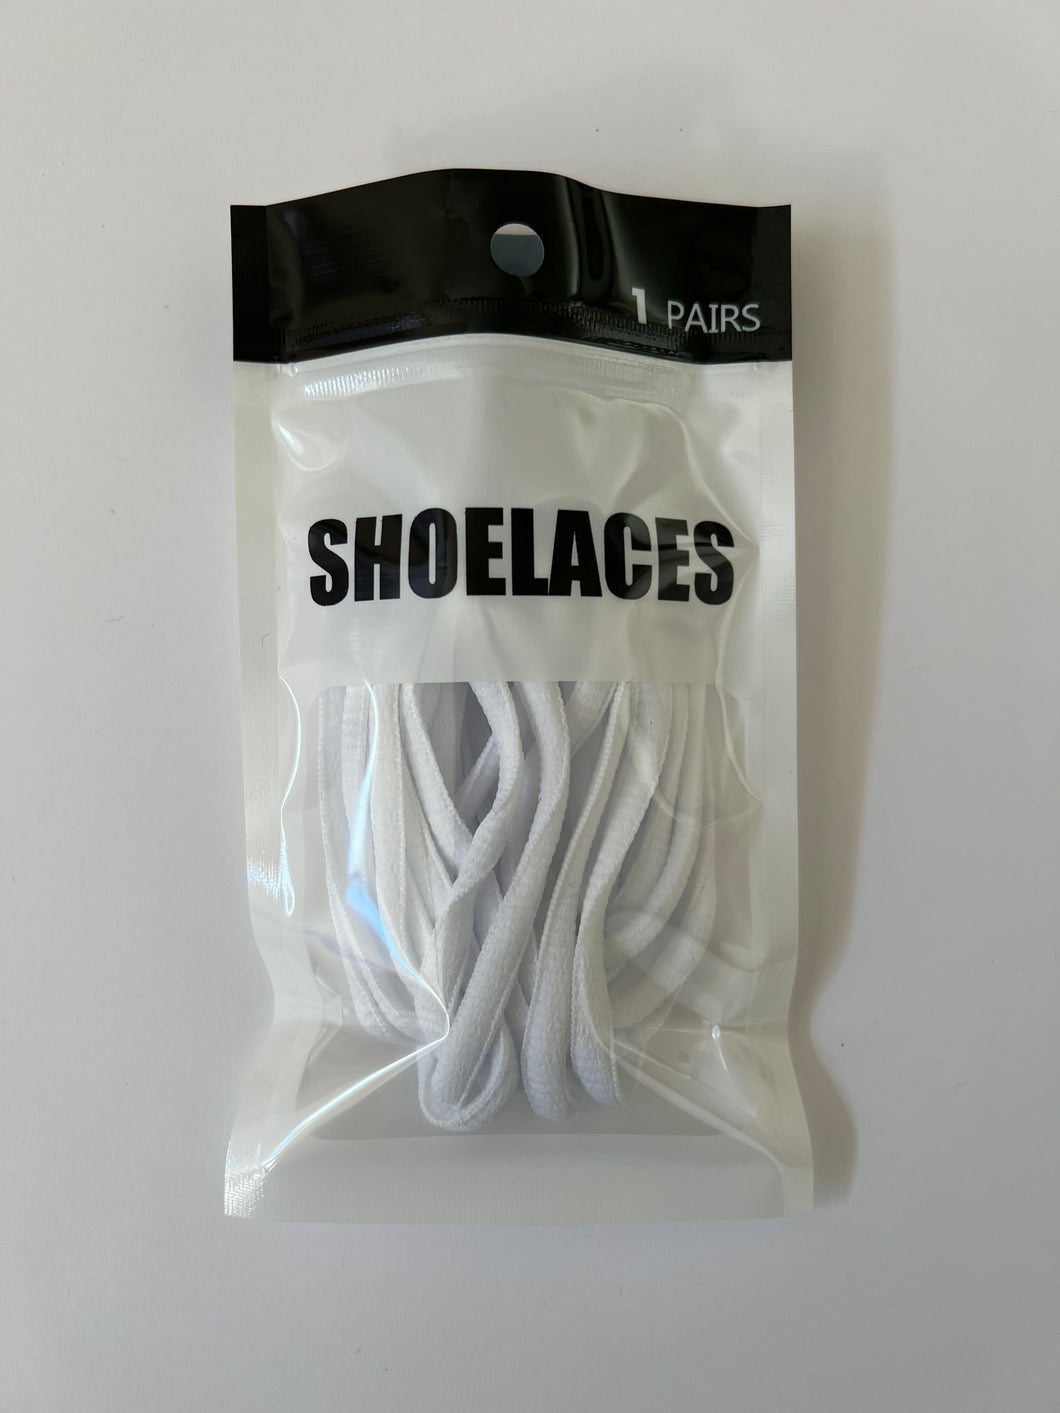 New Oval Replacement Shoelaces for Air Jordan 9, 10, 11, 12, 13 AJ1 Shoe Colors Use 